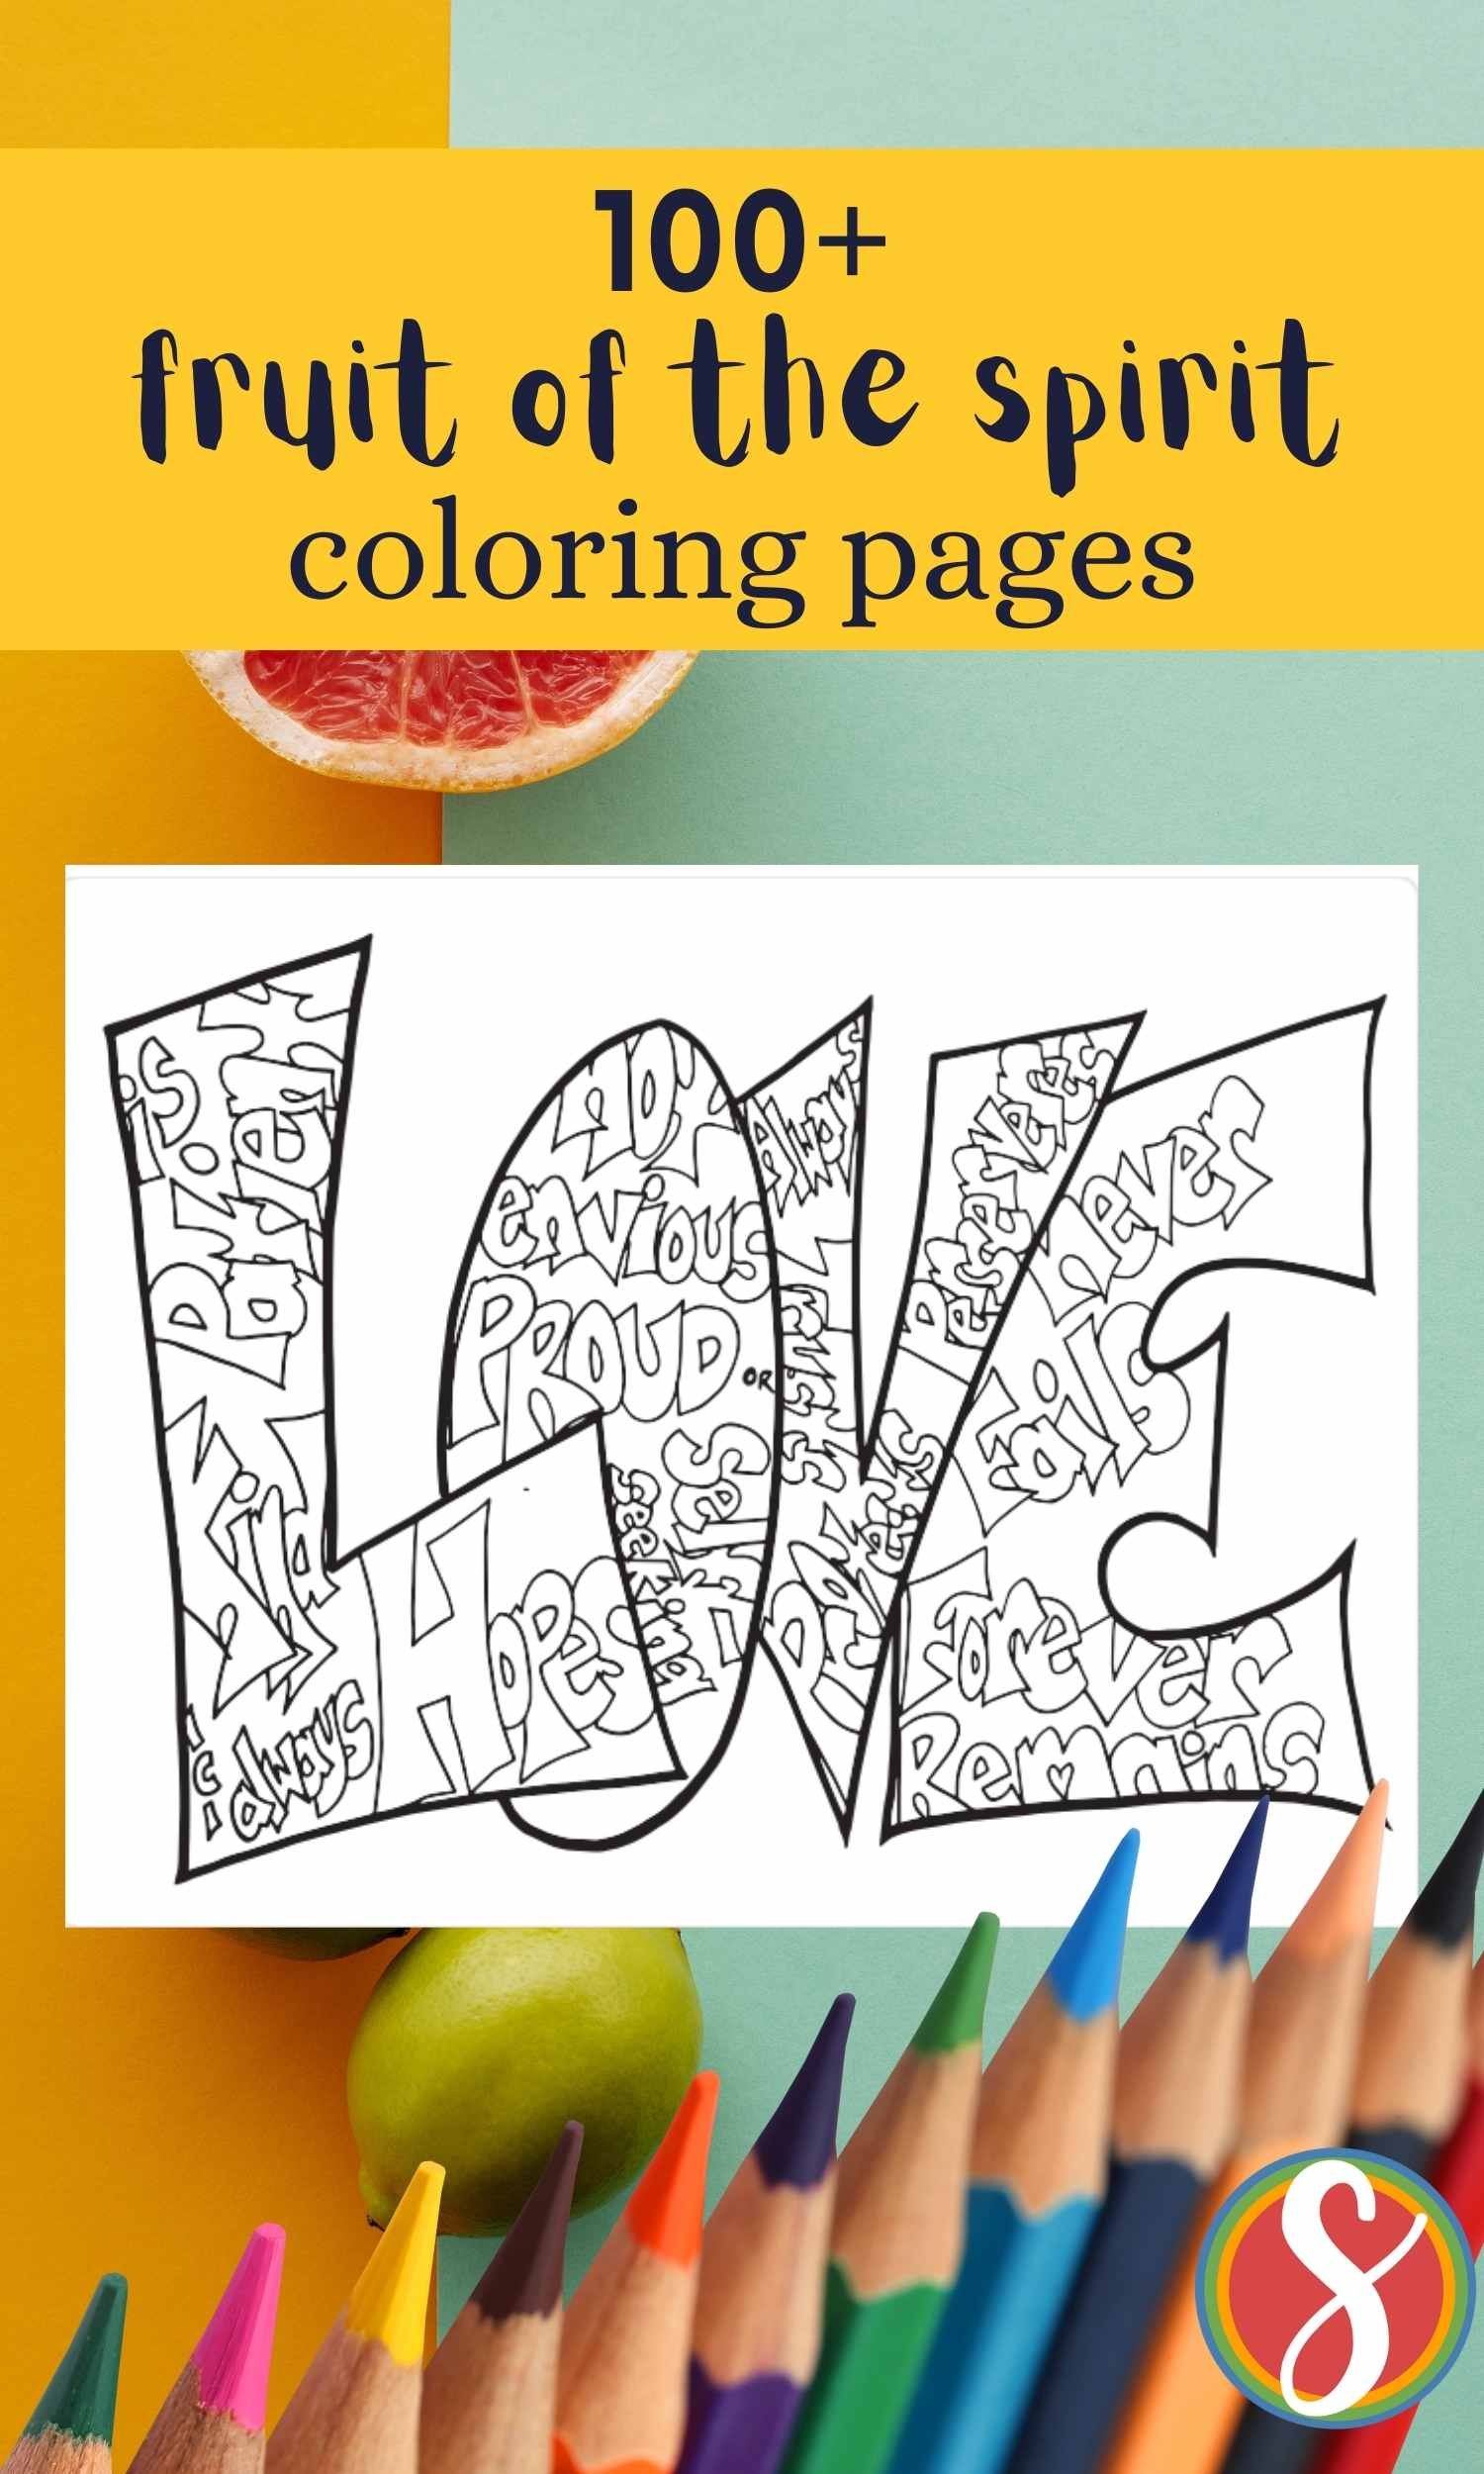 fruit of the spirit coloring page with Love in bubble letters filled with colorable love words